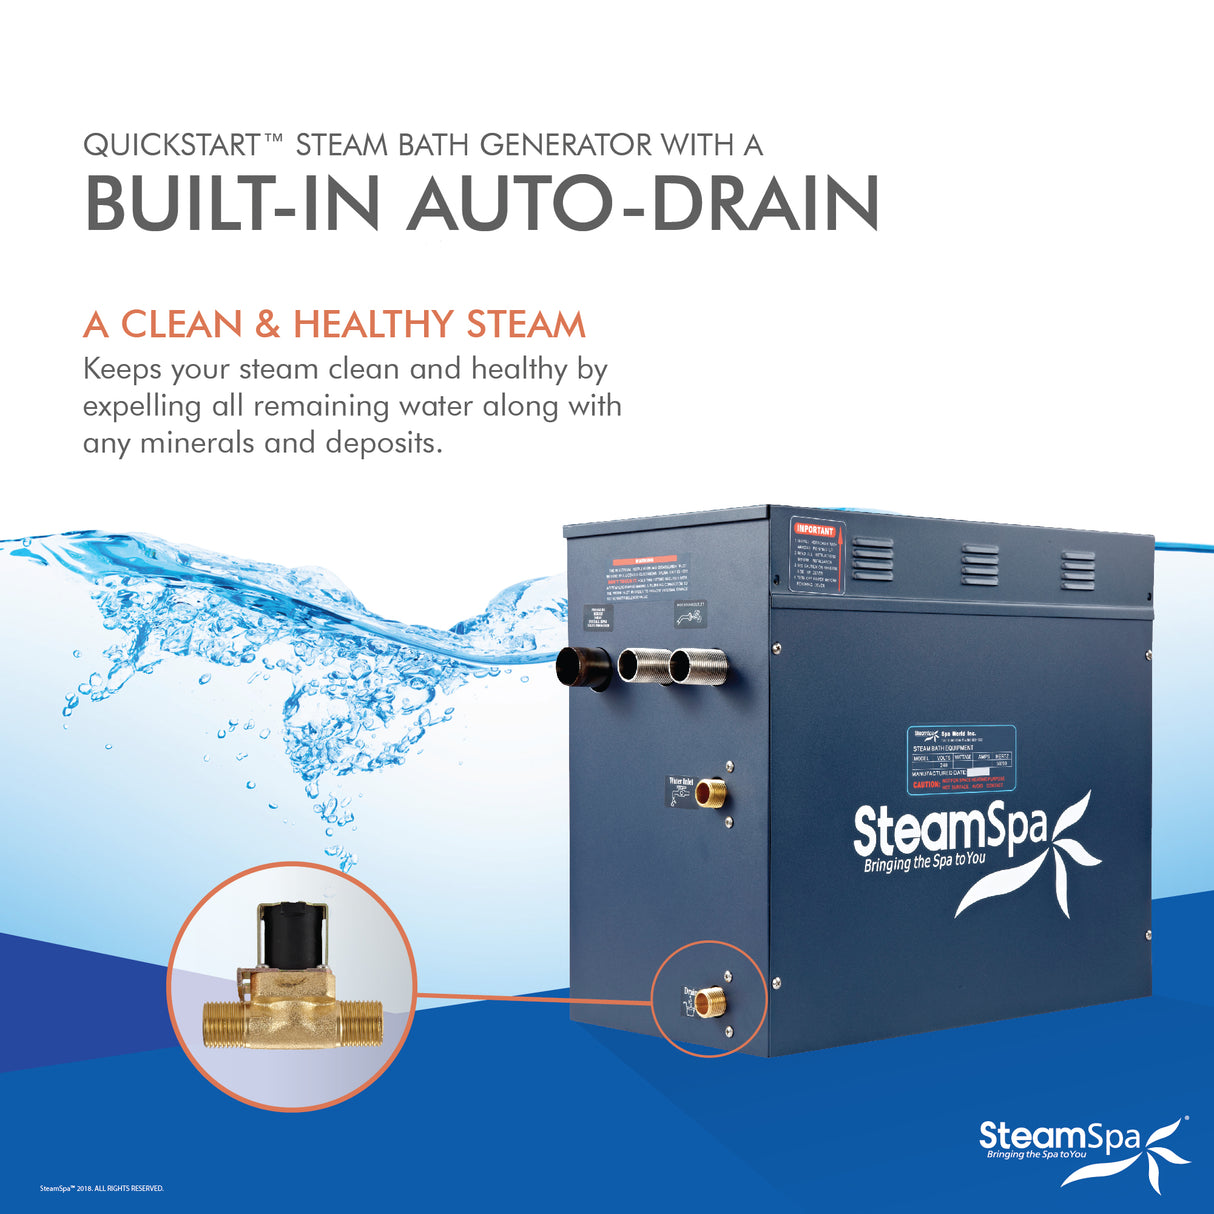 SteamSpa Executive 12 KW QuickStart Acu-Steam Bath Generator Package with Built-in Auto Drain and Install Kit in Oil Rubbed Bronze | Steam Generator Kit with Dual Control Panel Steamhead 240V | SS-EXT1200OB-A SS-EXT1200OB-A